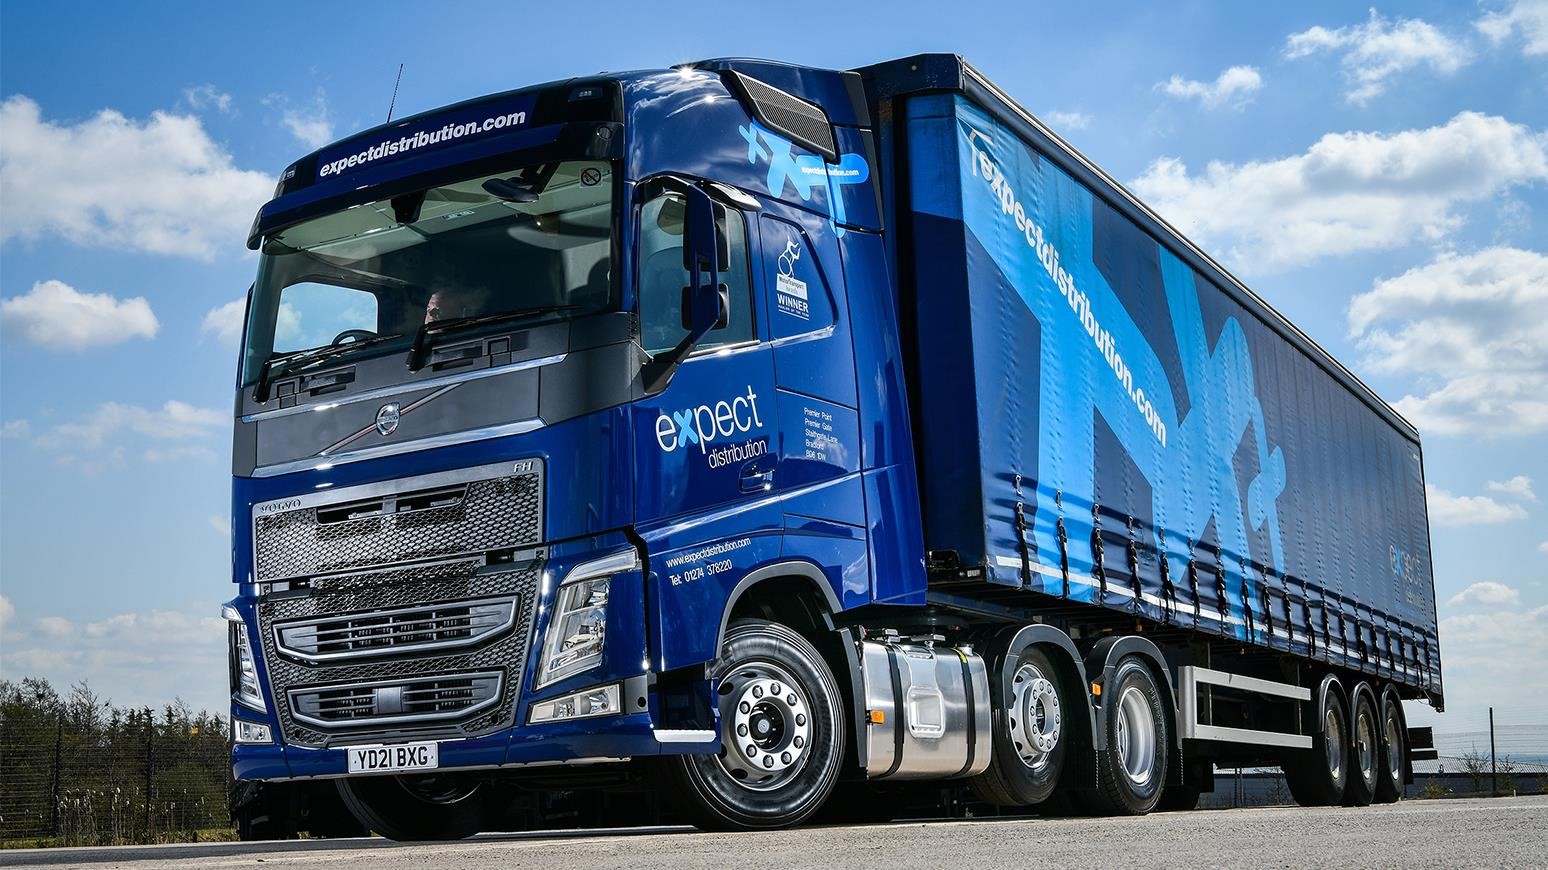 Expect Distribution Returns To Volvo With 6 New FH 6x2 Tractor Units